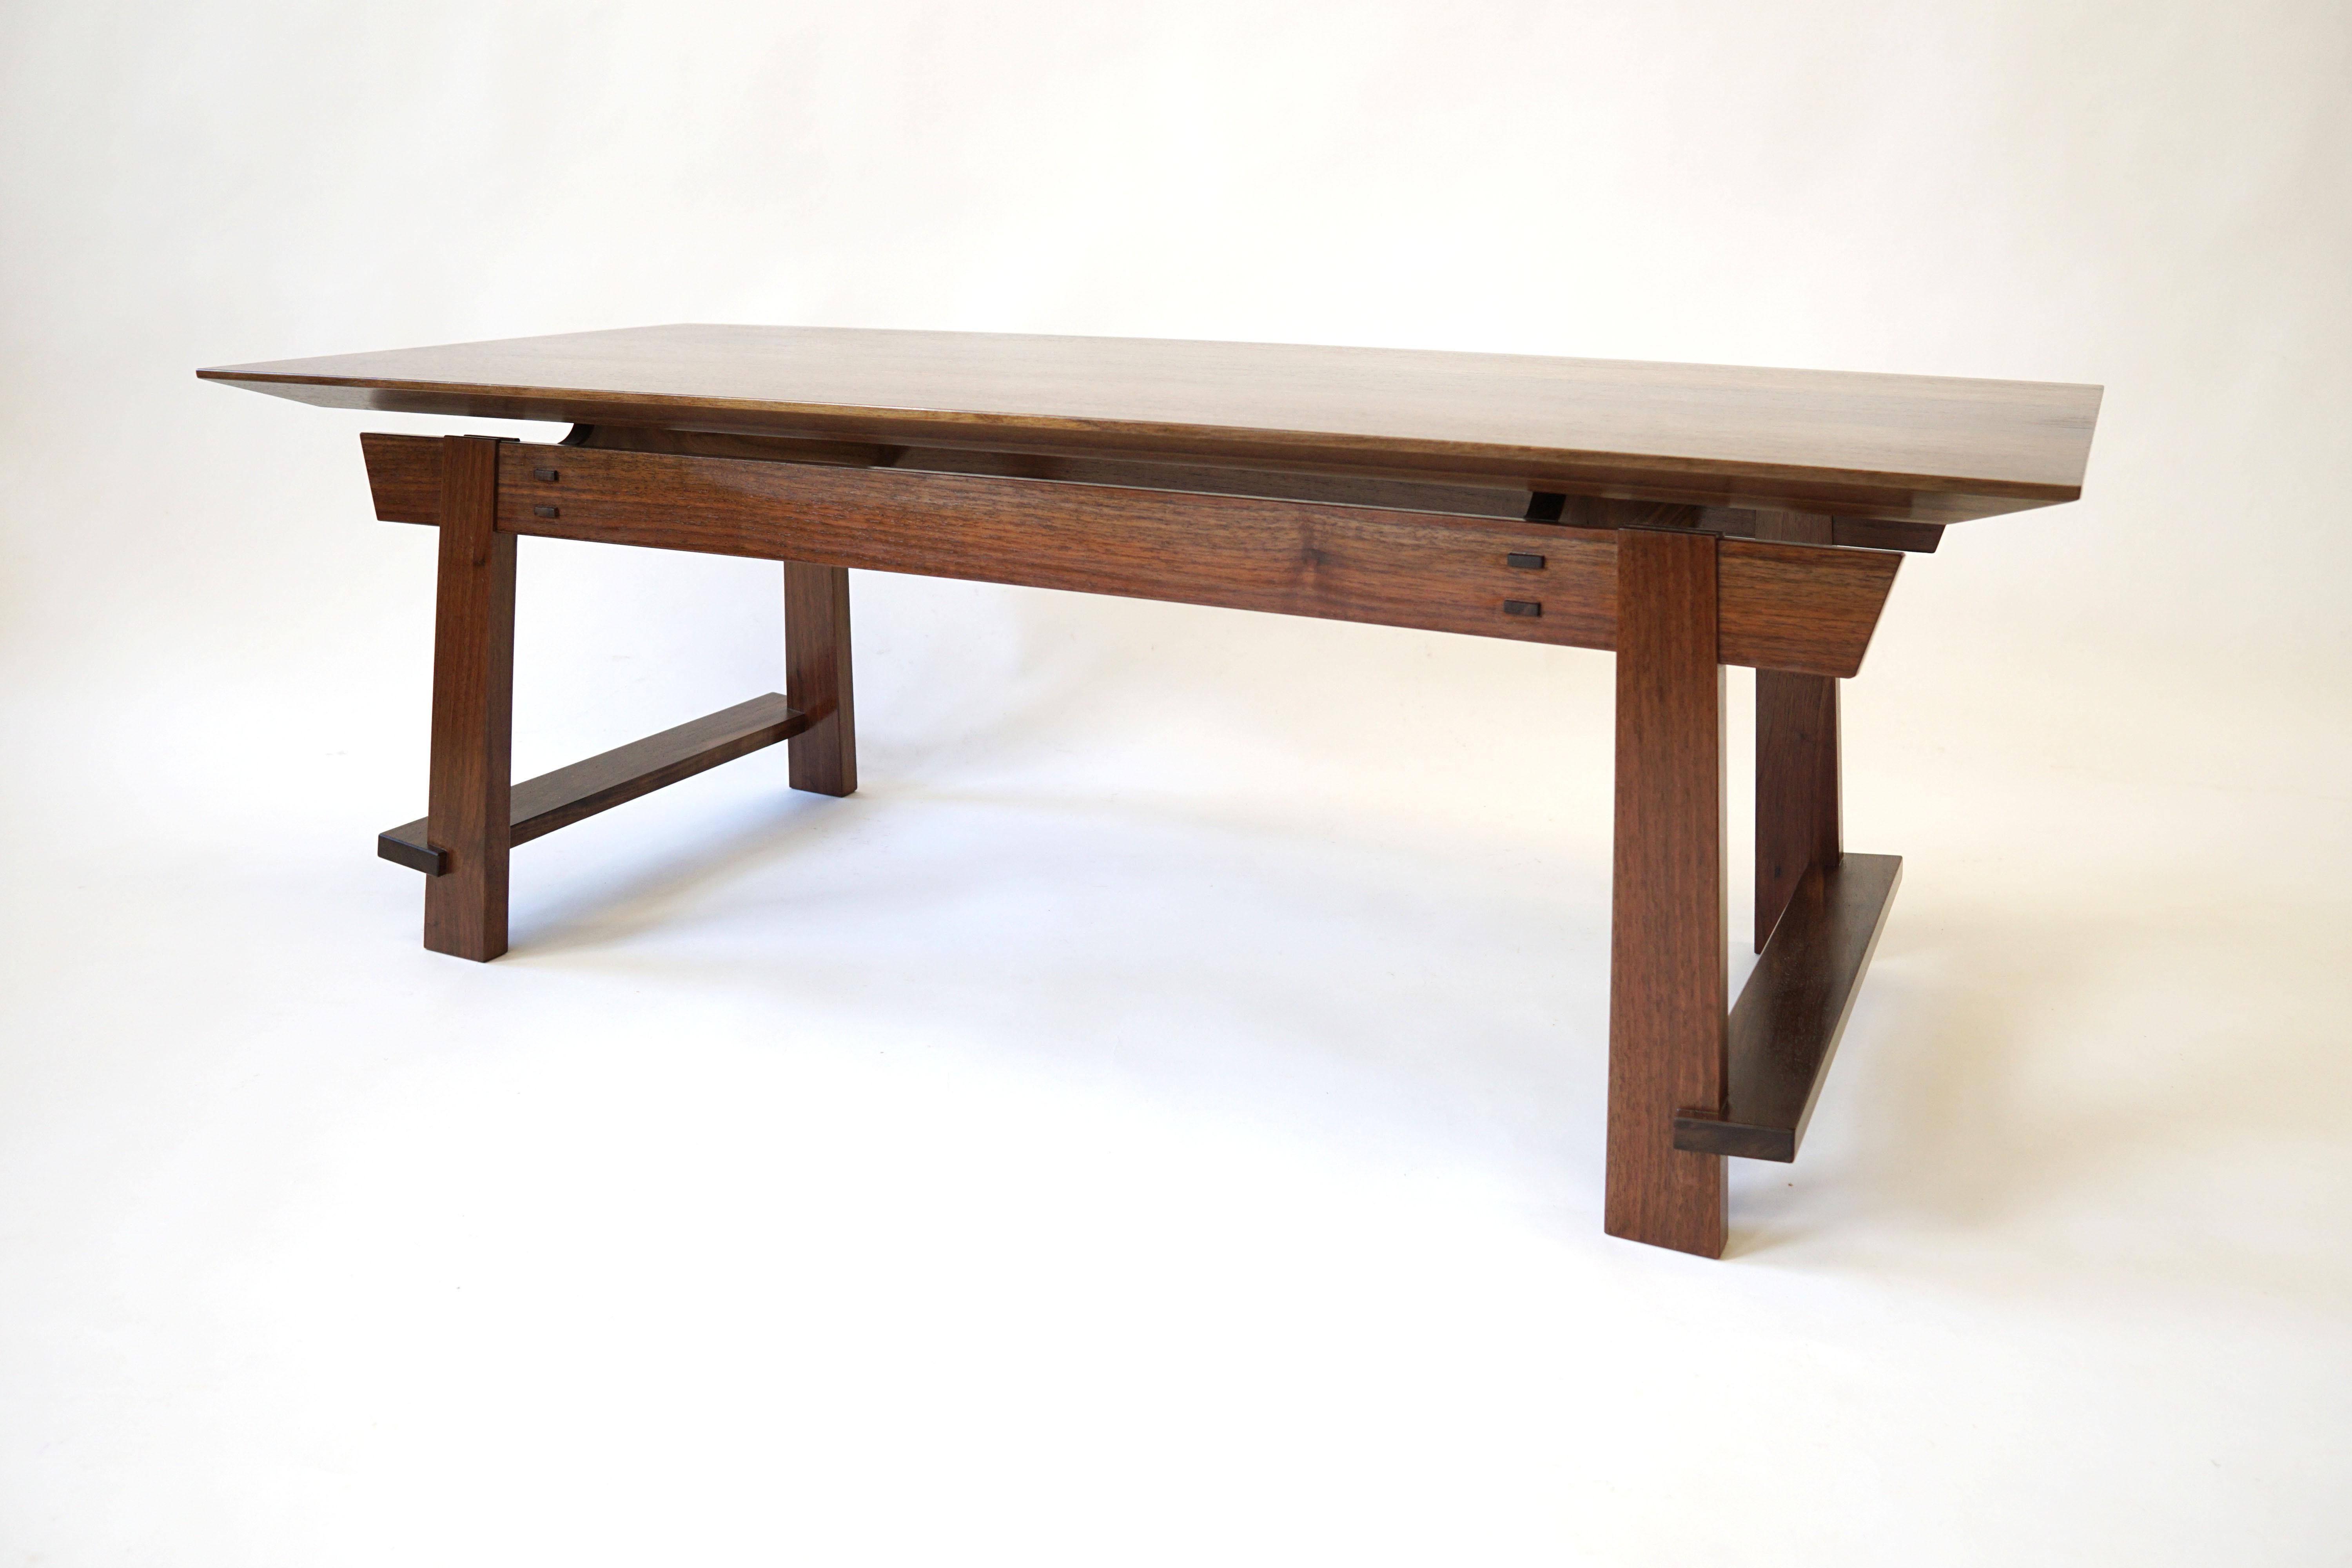 Rilley Coffee Table, Exposed Joinery, Handcrafted in Walnut In New Condition For Sale In Southampton, MA